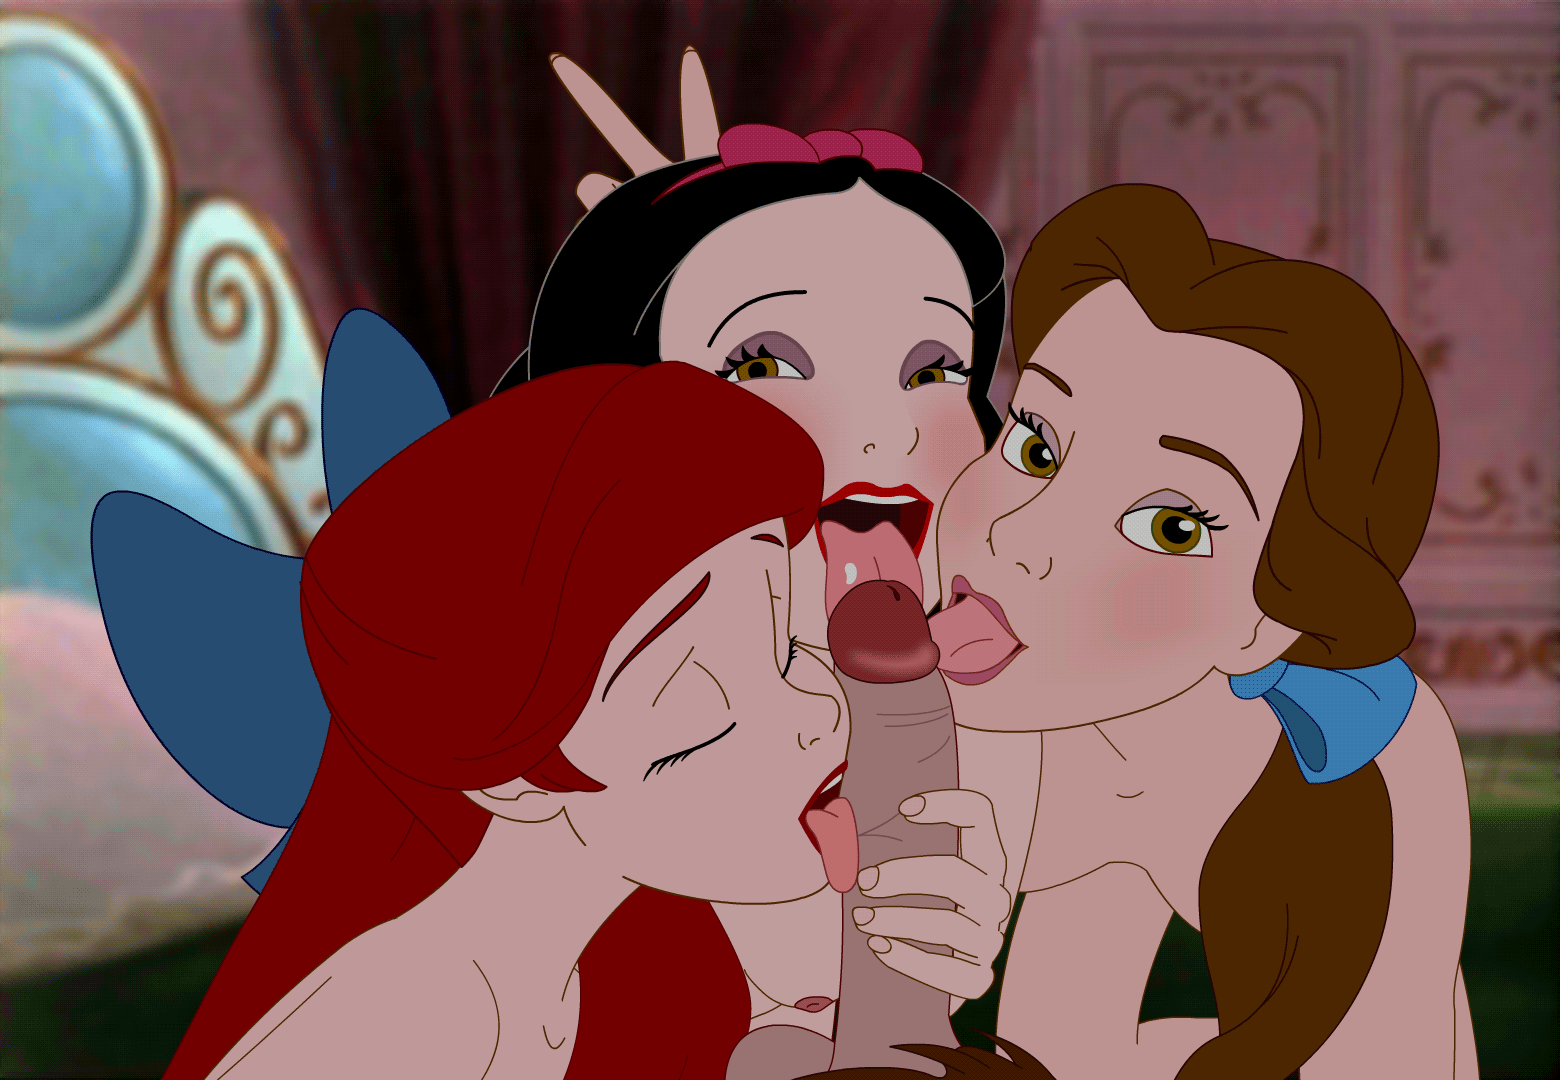 Sex porn. info gif obliging disney princesses 636ac4d3a73c0 about Big Tits. Enjoy watching new porn gifs every day